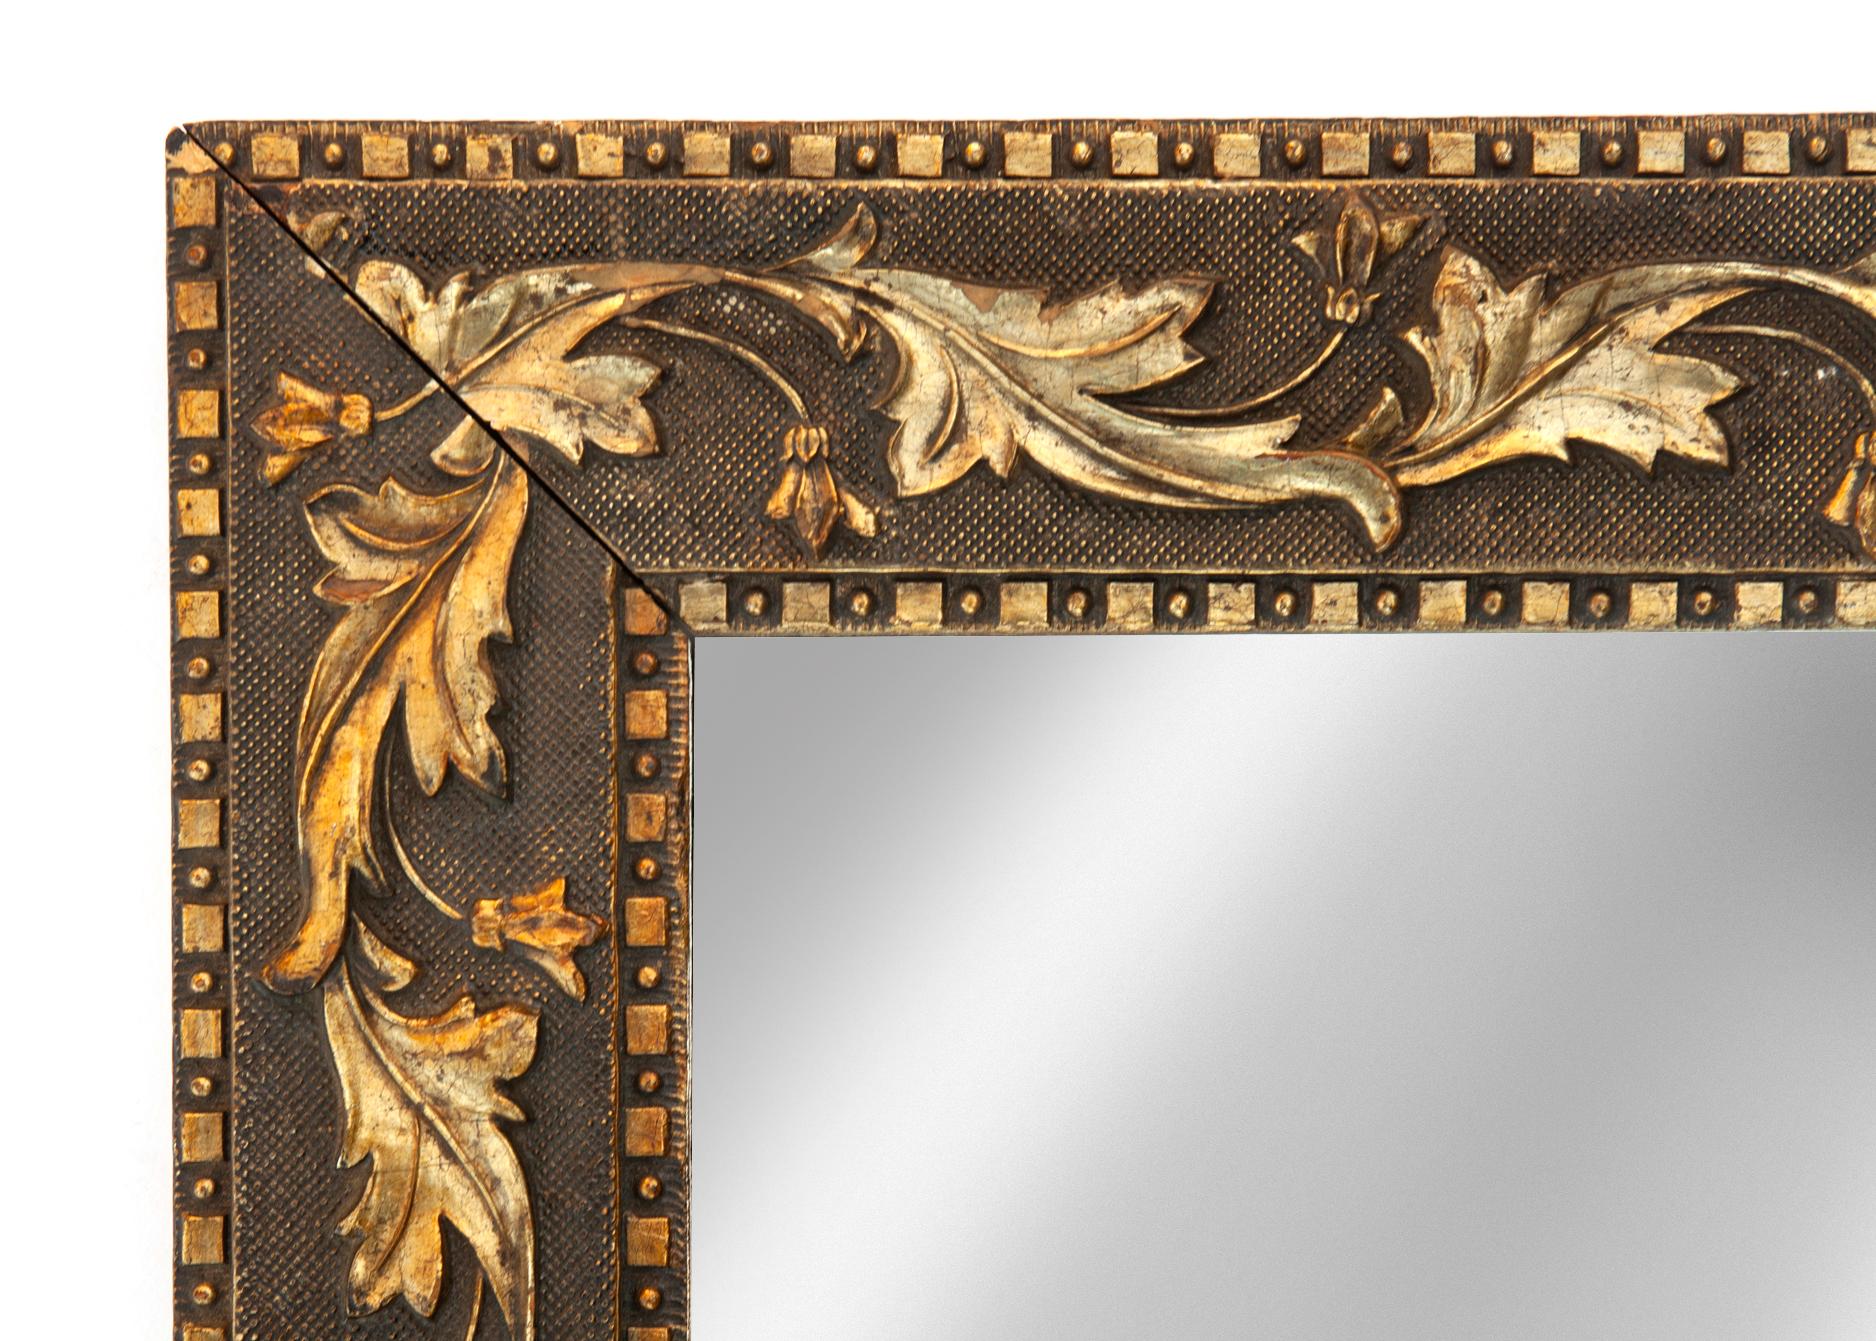 This small mirror is embellished with burnished gold swirling leaves on a dark bronze textured background. The exterior and interior border is comprised of a geometric pattern of small squares and dots. 
This mirror is a rich & interesting accent